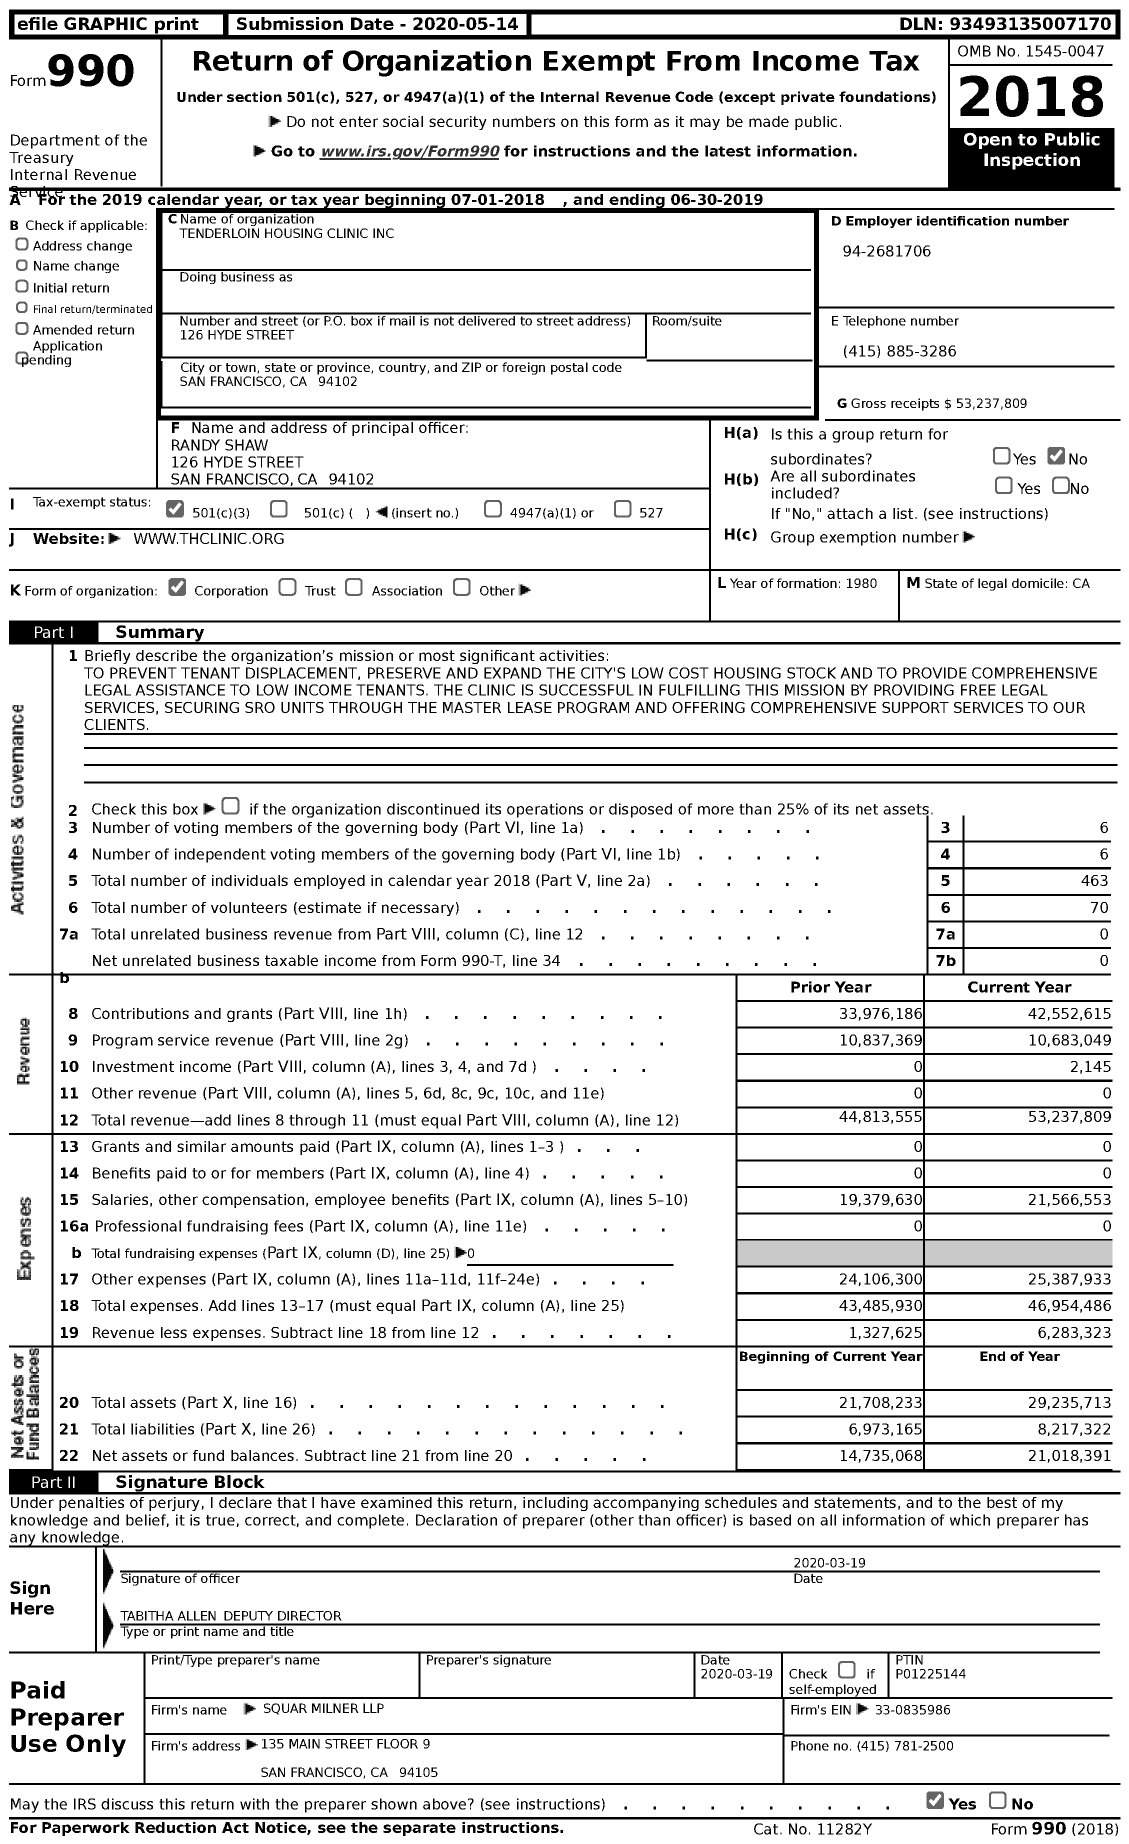 Image of first page of 2018 Form 990 for Tenderloin Housing Clinic (THC)